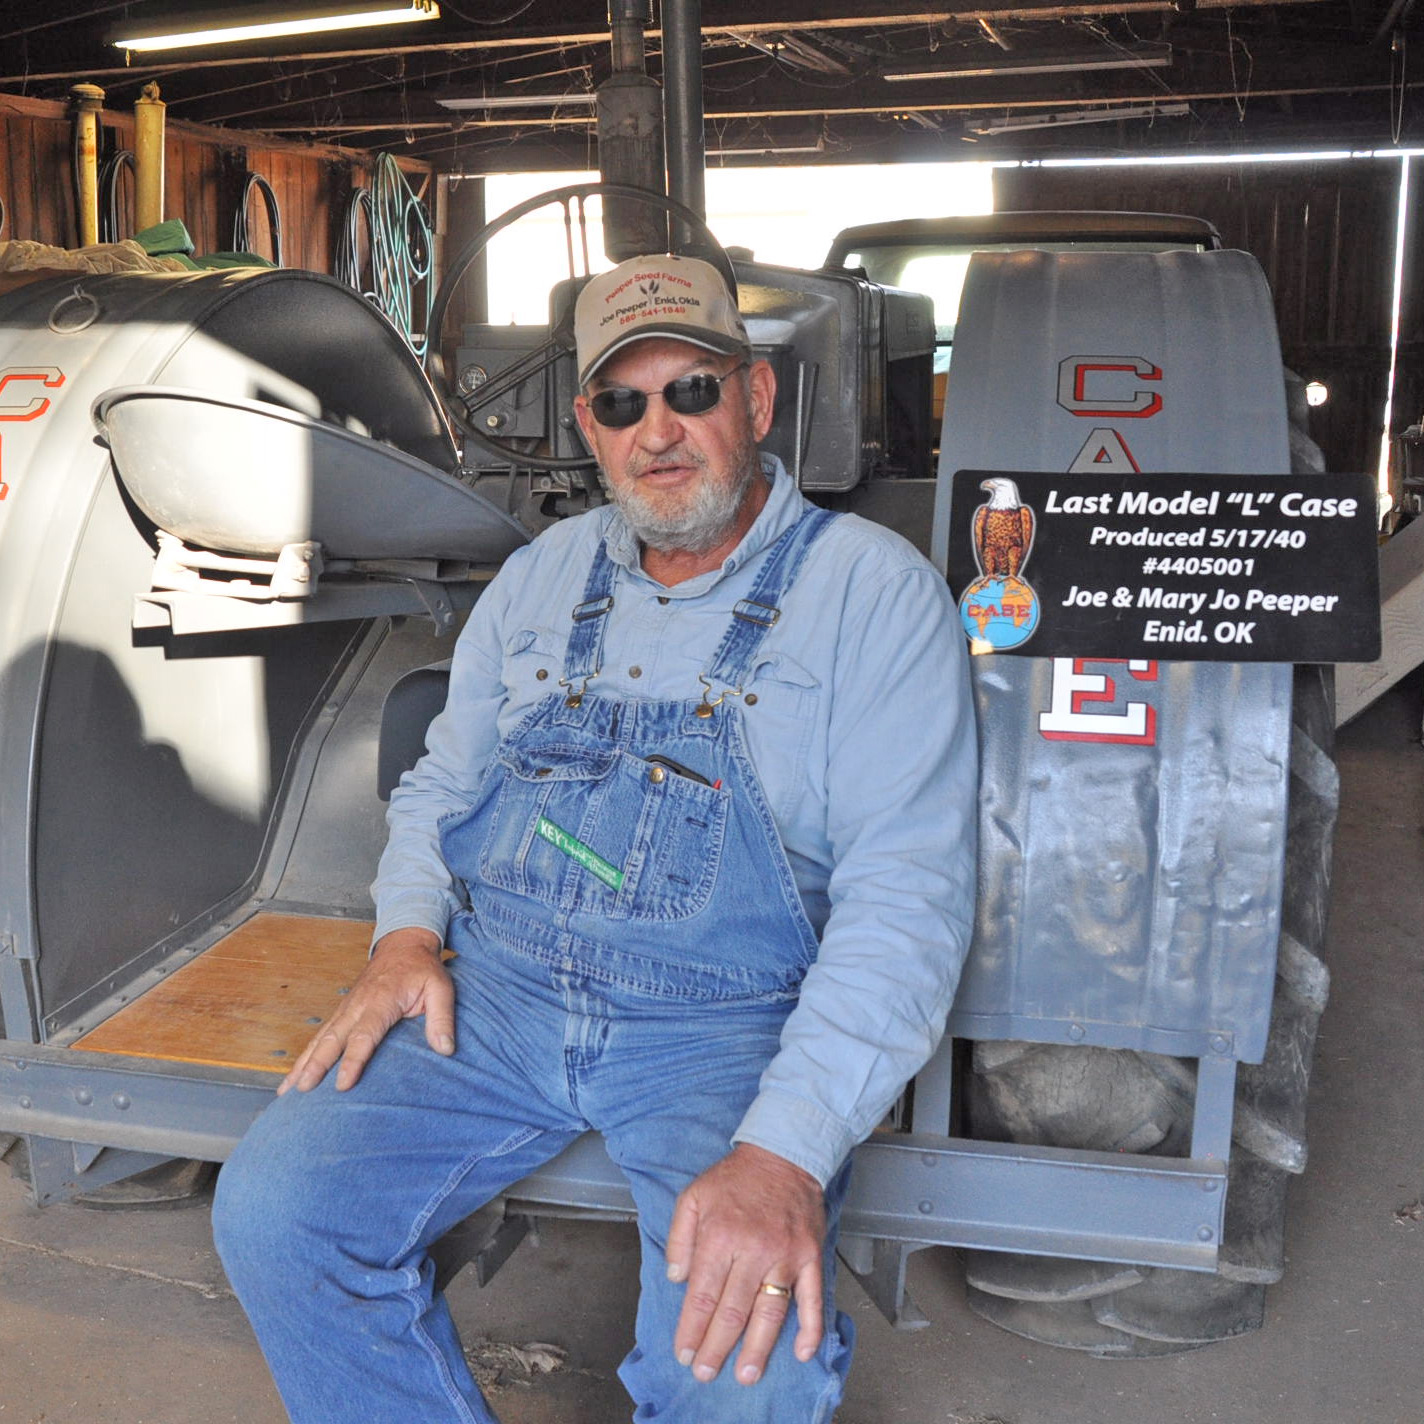 Tractor restoration projects keep past alive on Oklahoma farm  – High Plains Journal